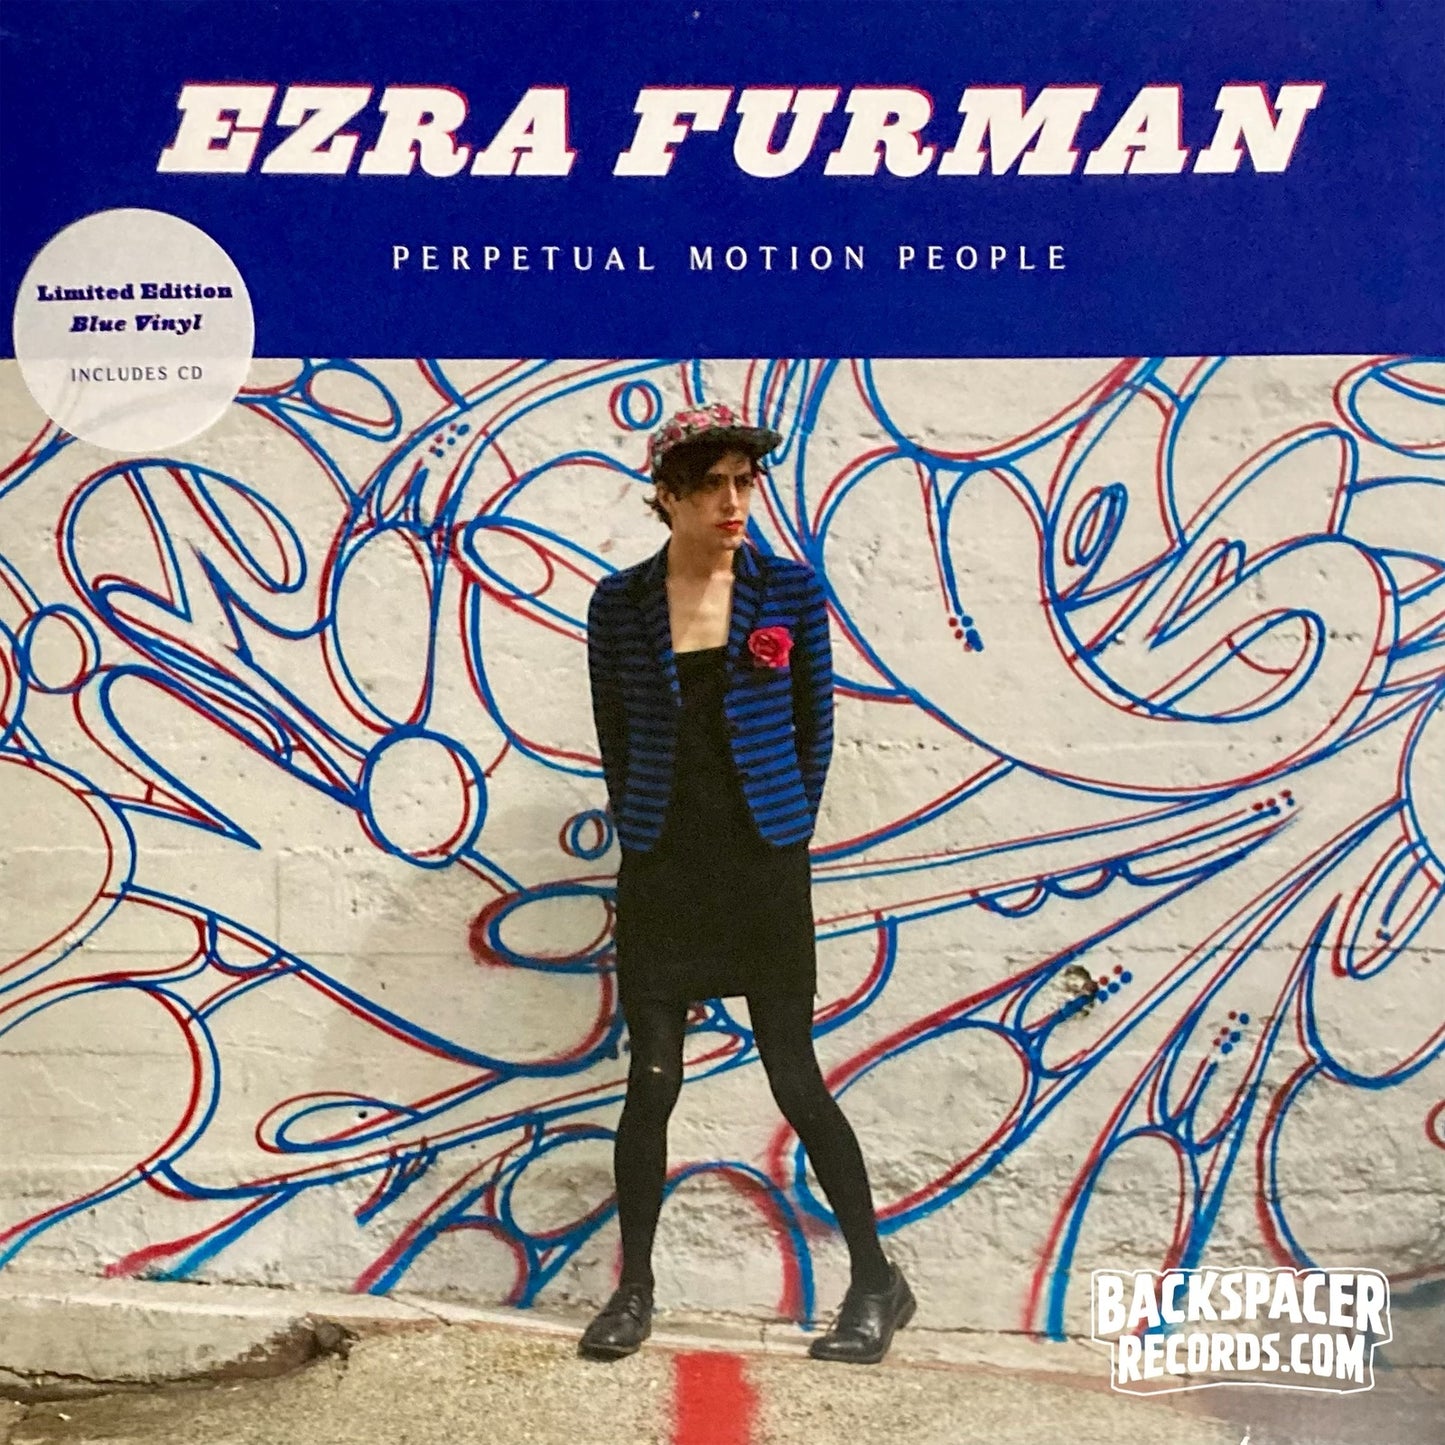 Ezra Furman ‎– Perpetual Motion People (Limited Edition) LP + CD (Sealed)